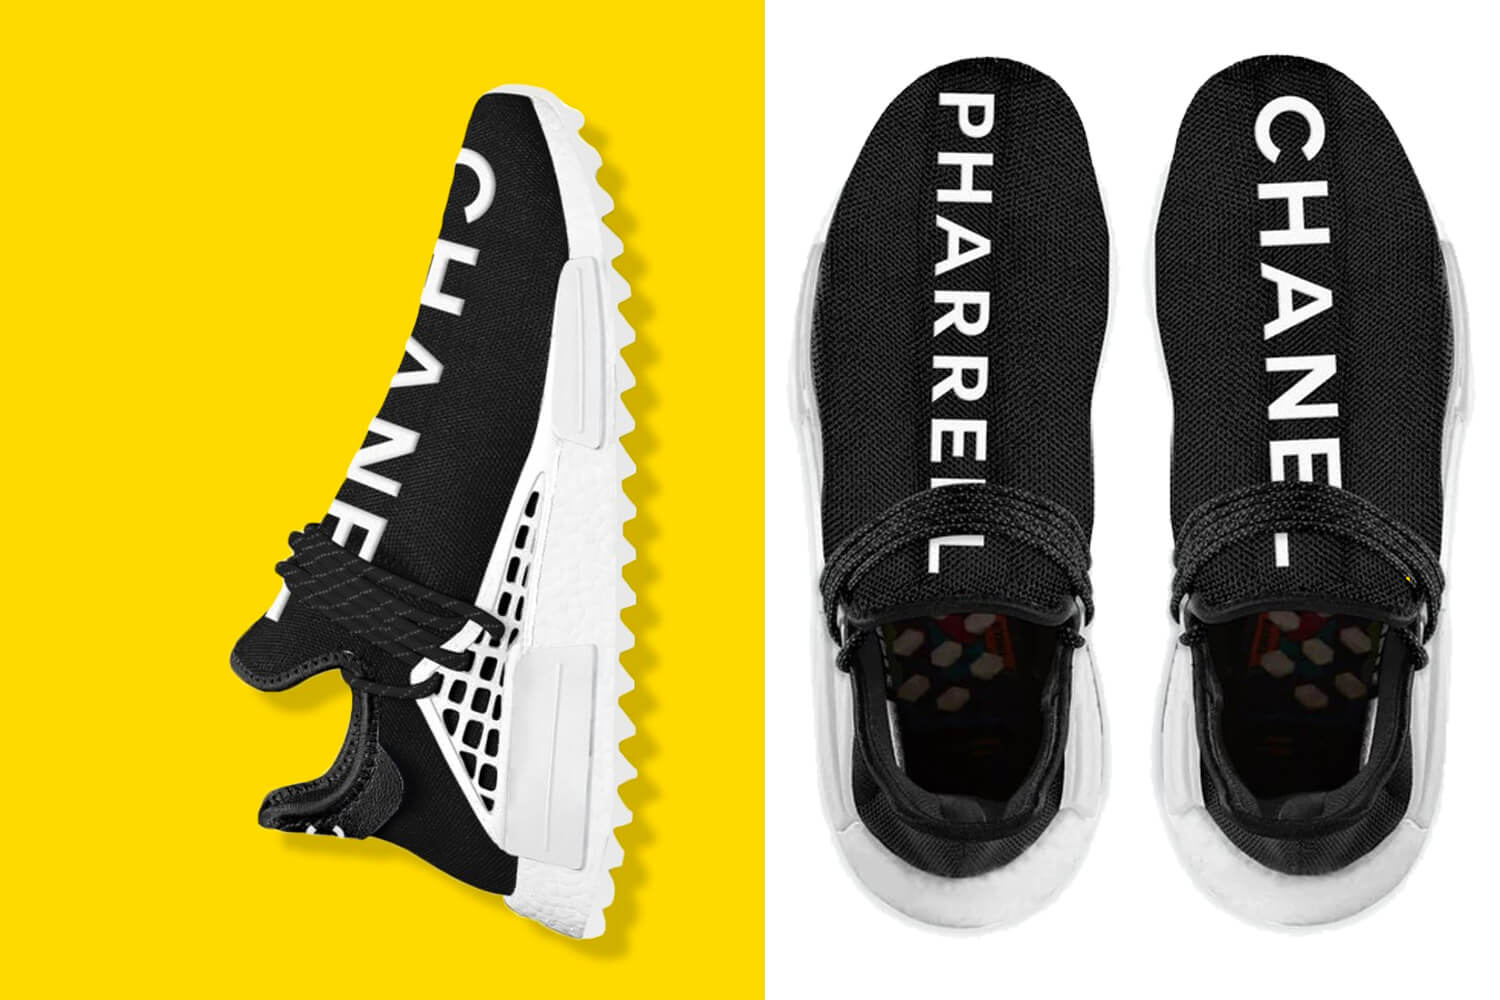 A guide to buying the Chanel x Pharrell x Adidas NMD sneakers